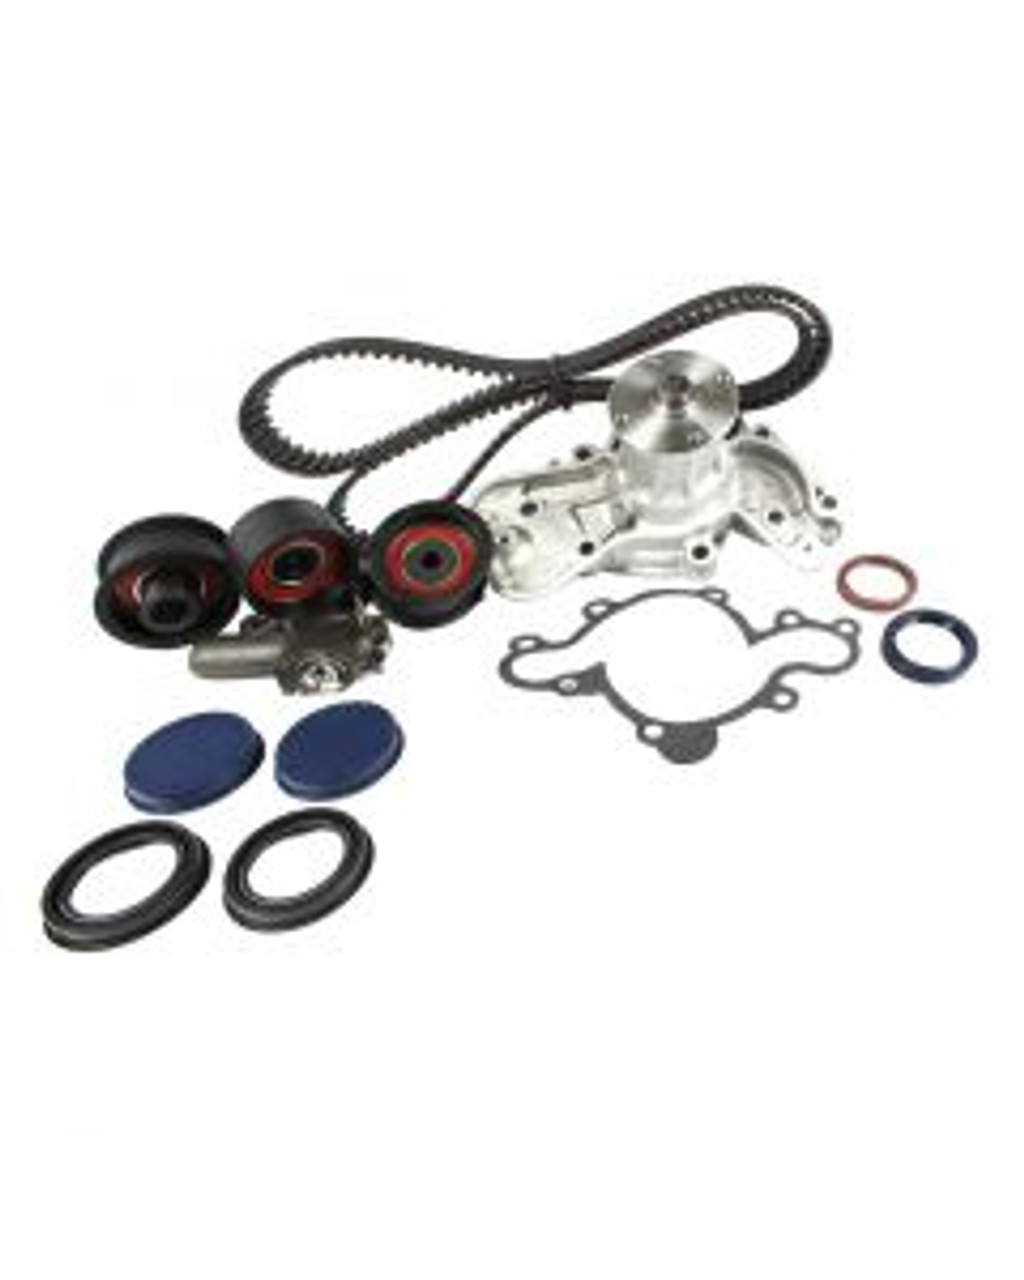 Timing Belt Kit with Water Pump 3.0L 1989 Mazda 929 - TBK470WP.2